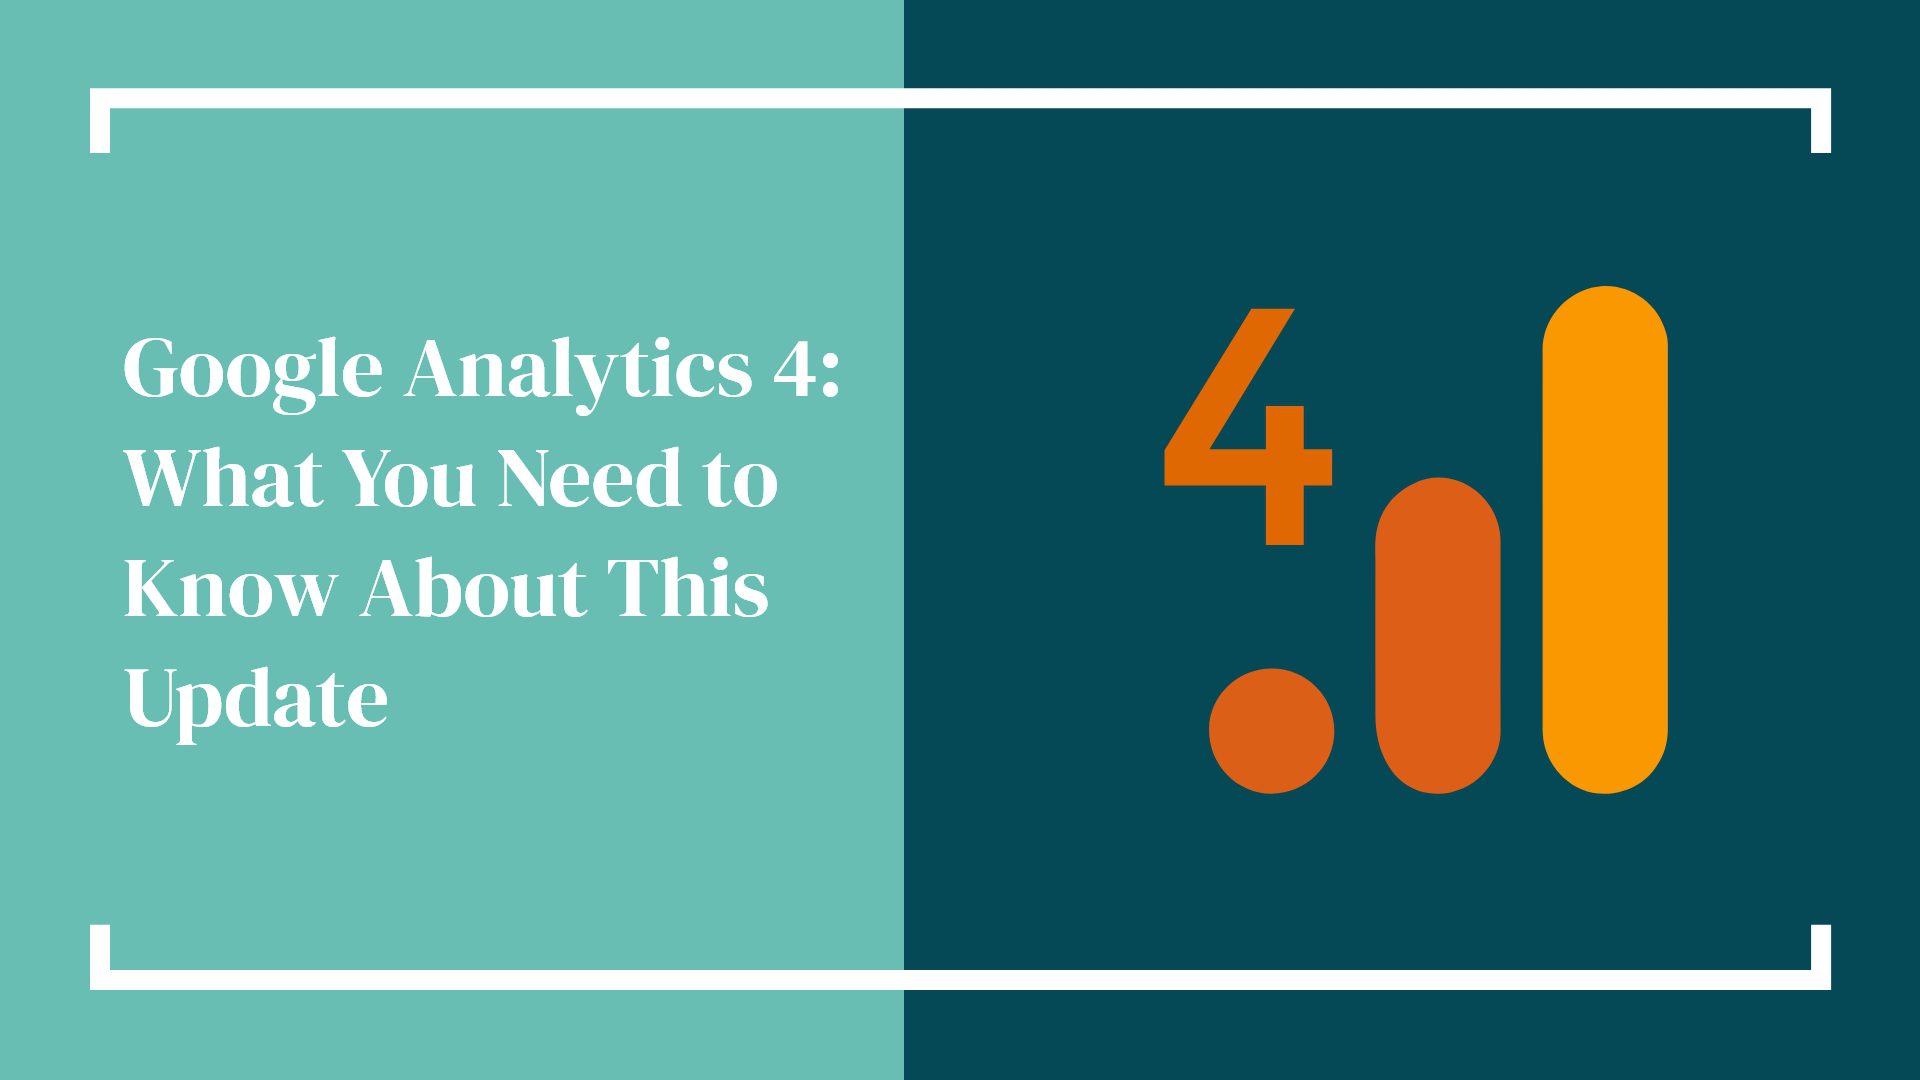 Google Analytics 4: What You Need to Know About This Update